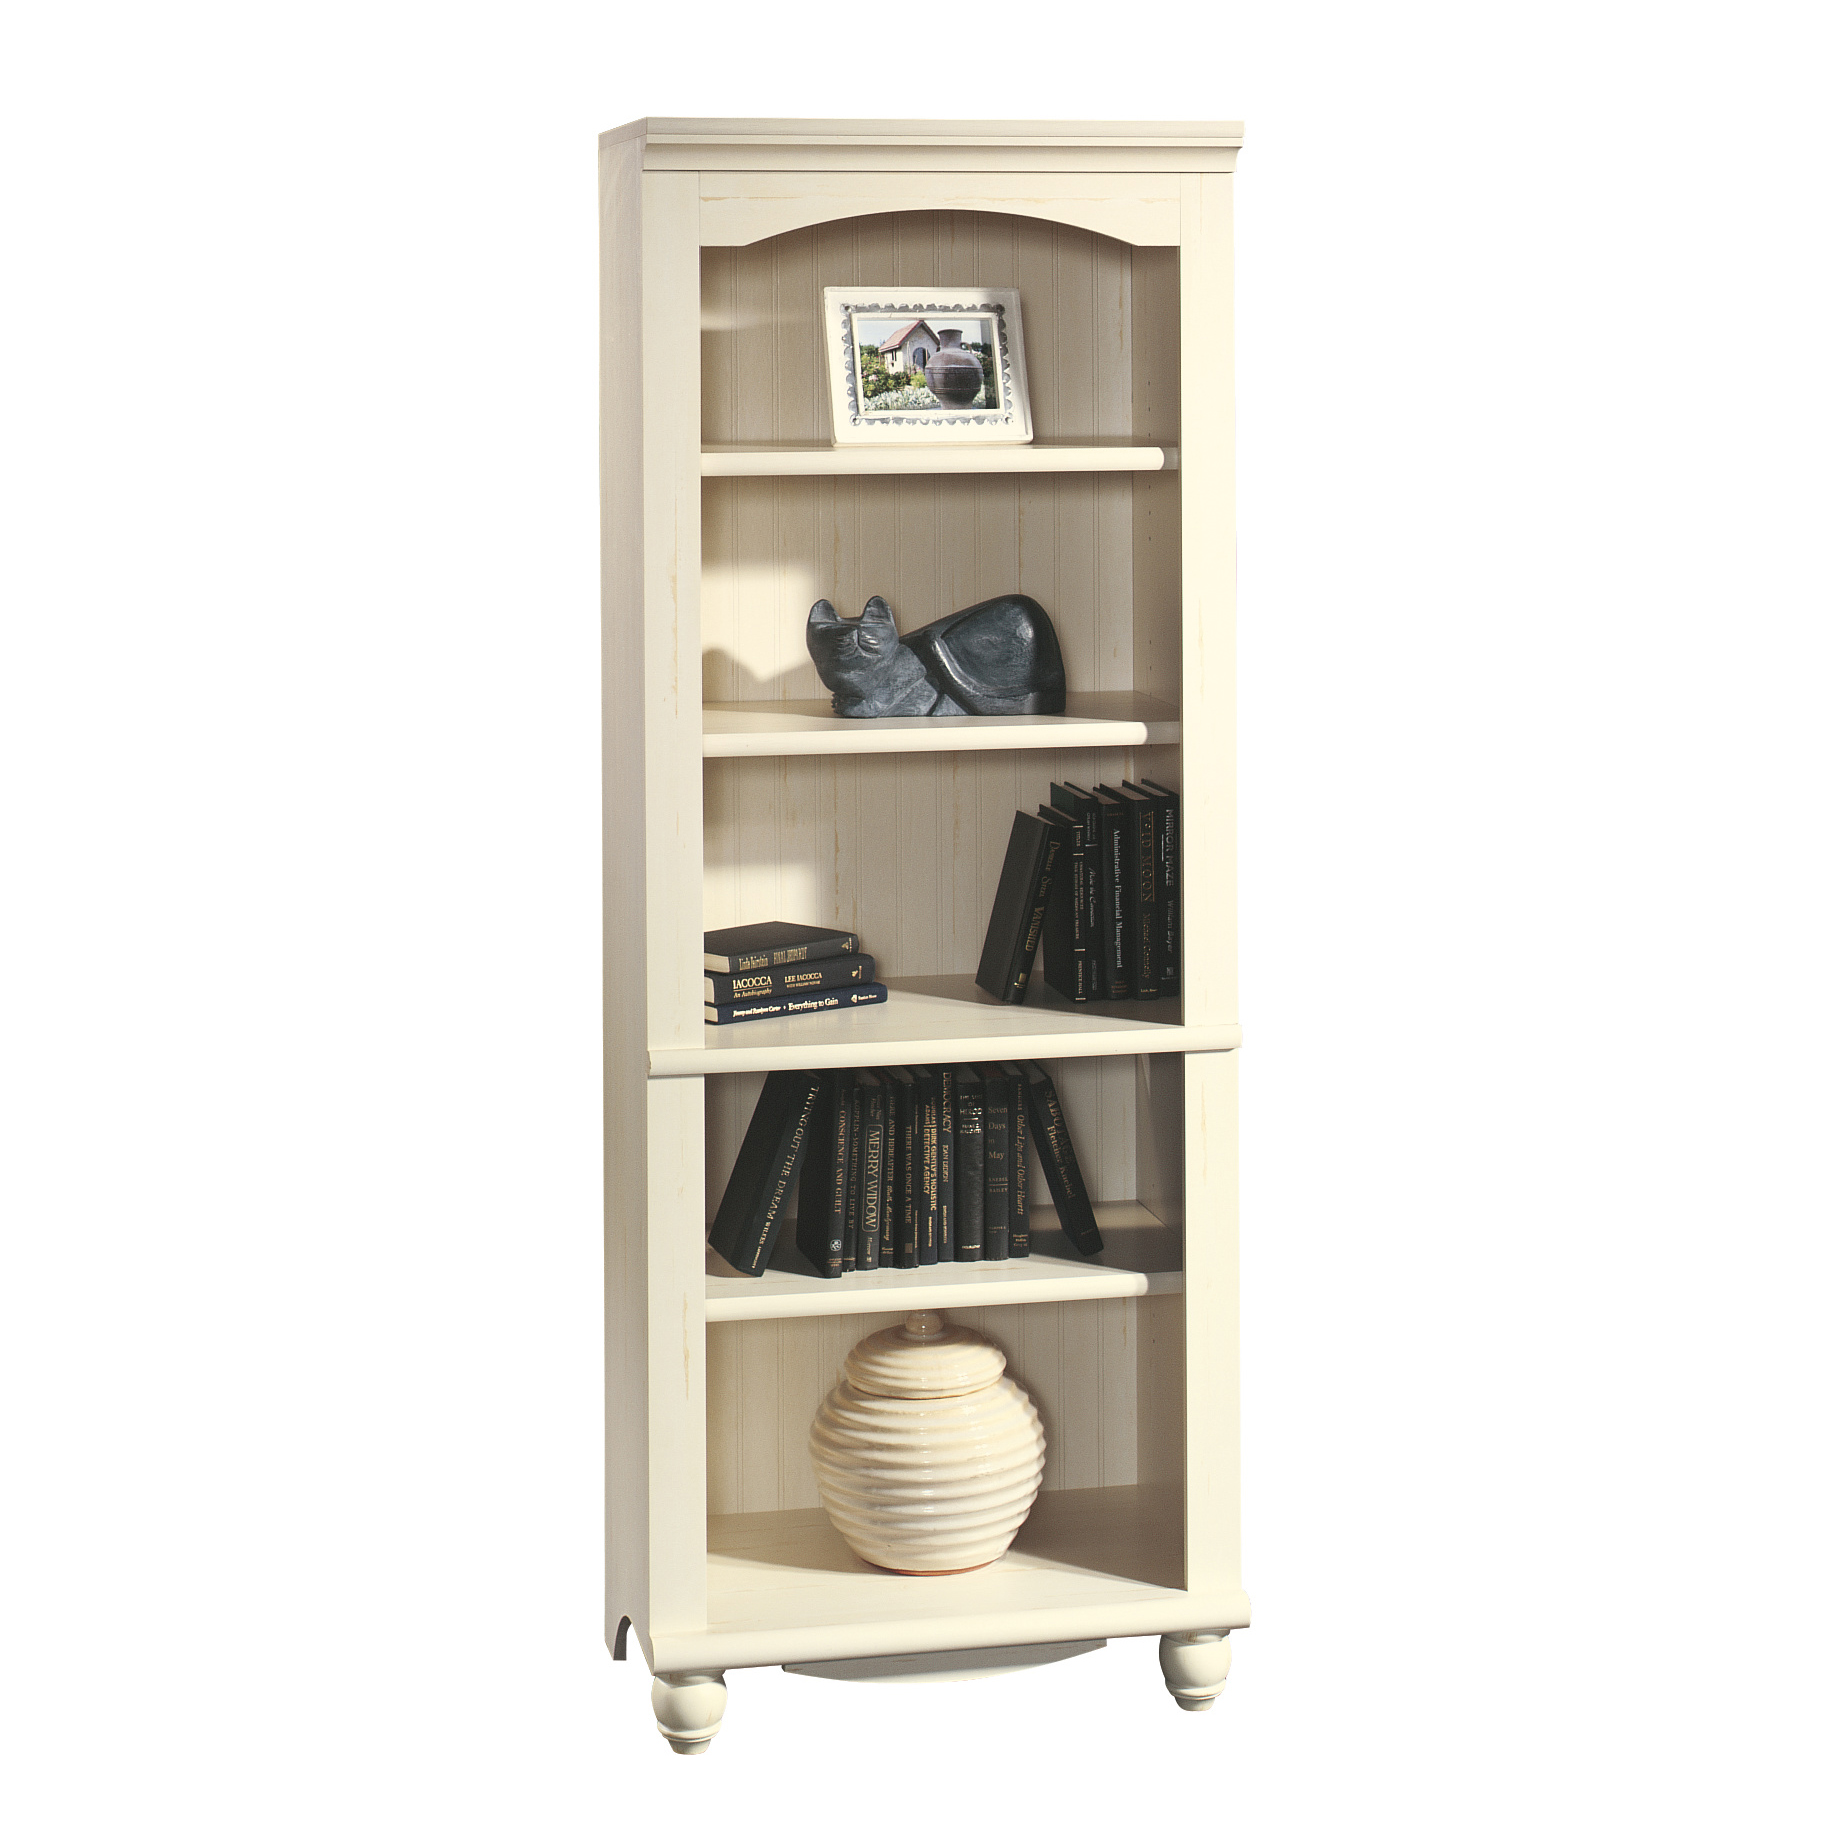 Sauder Harbor View 72" Library Bookcase, Antiqued White Finish - image 1 of 6